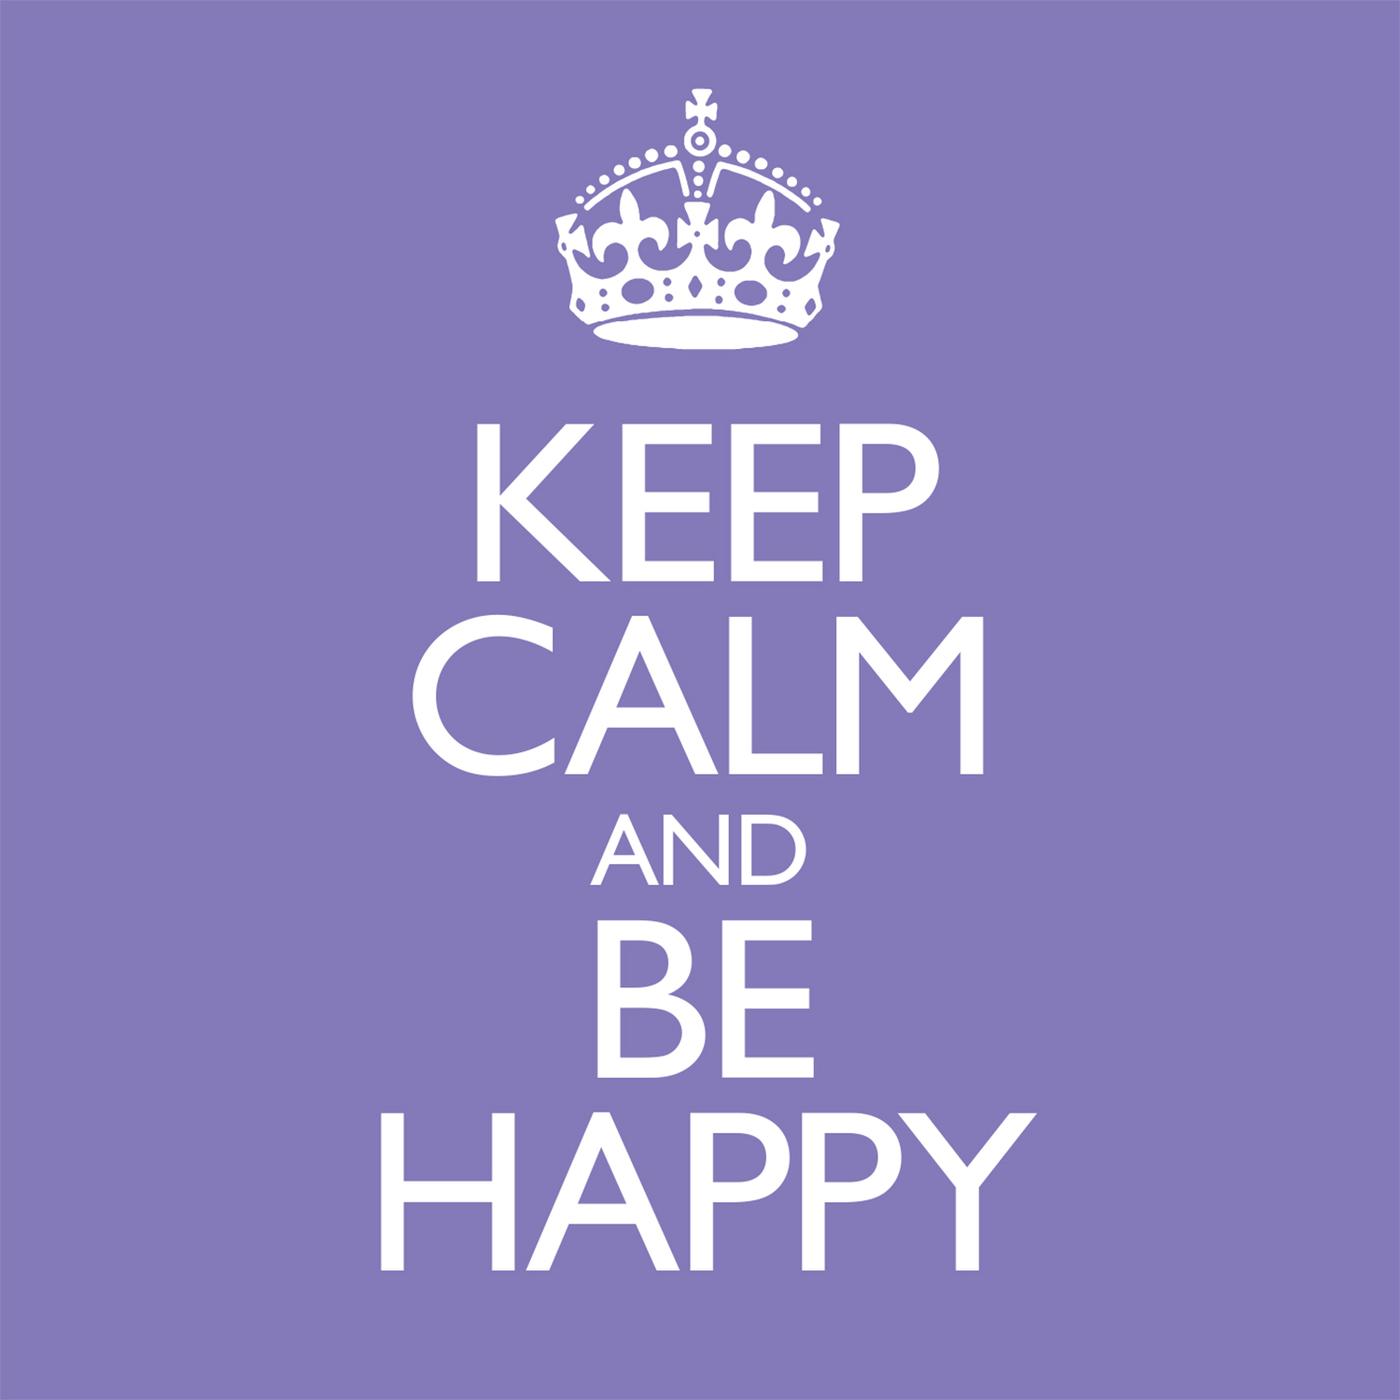 Be happy away. Keep Calm. Keep Calm and be Happy. Be Calm. Keep Calm and Relax.